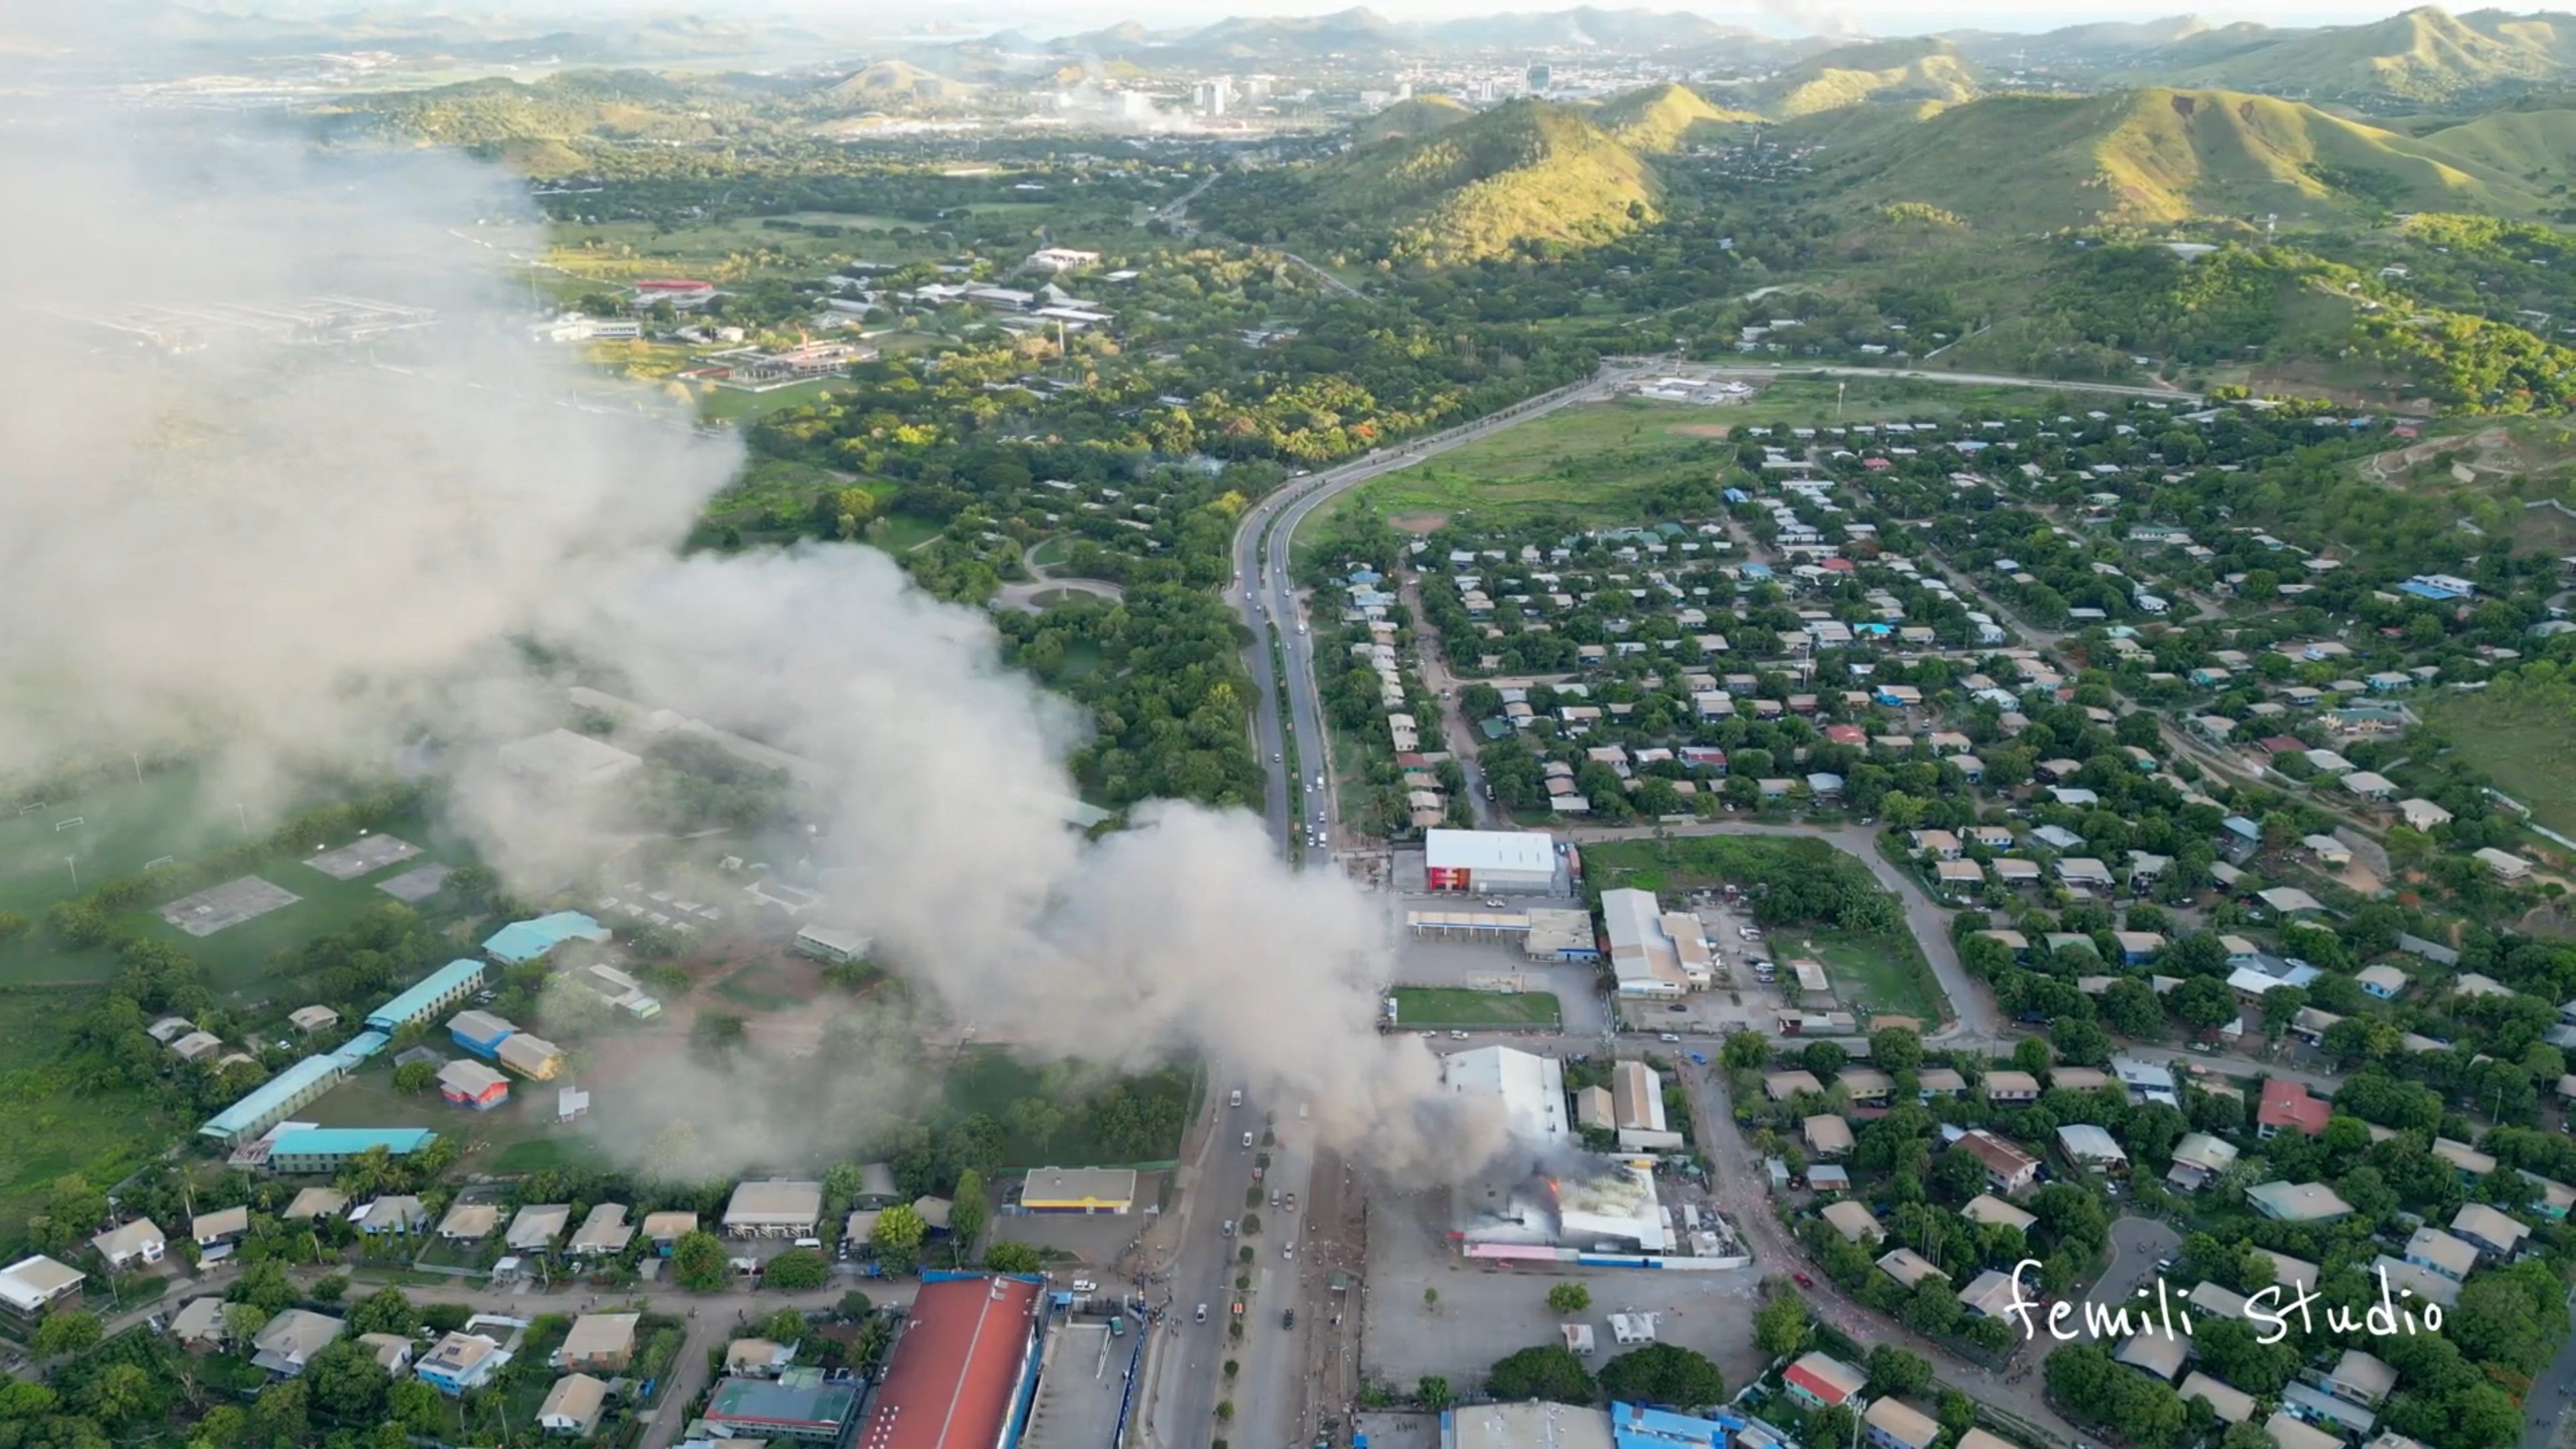 Aerial view shows a burning building amid protests over a pay cut for police that officials blamed on an administrative glitch, in Port Moresby